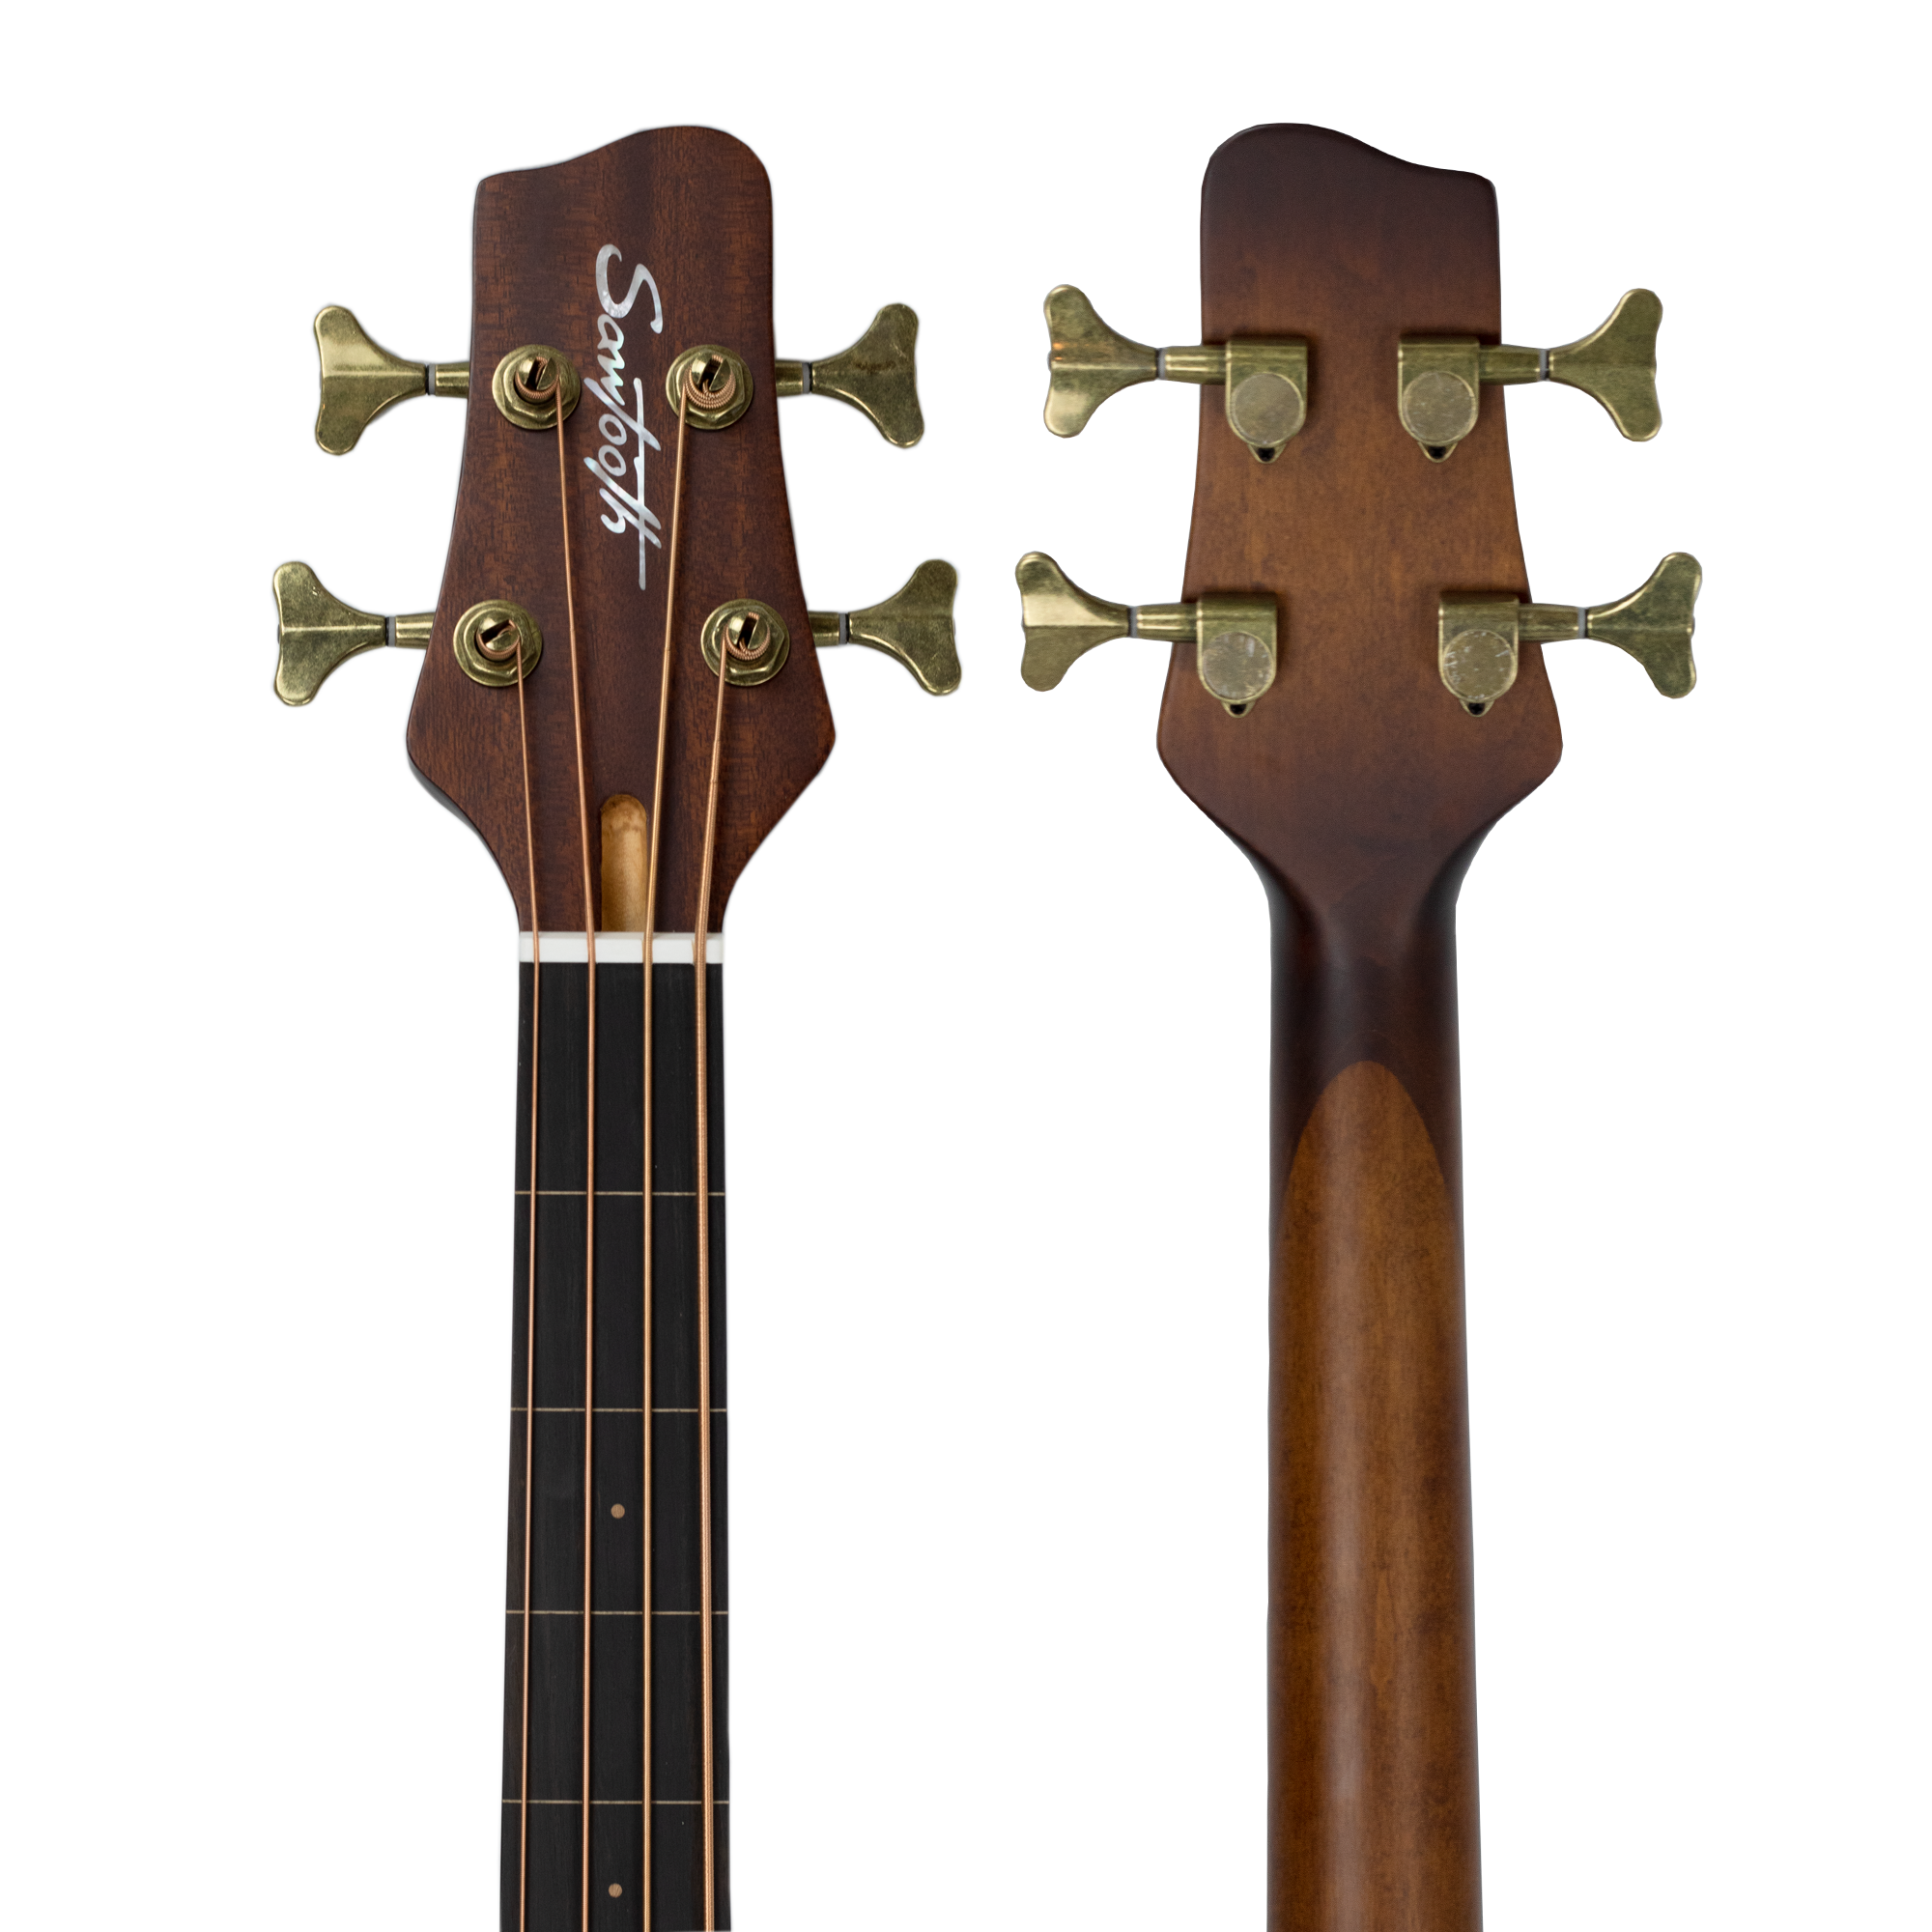 Sawtooth Left-Handed Rudy Sarzo Signature Fretless Acoustic